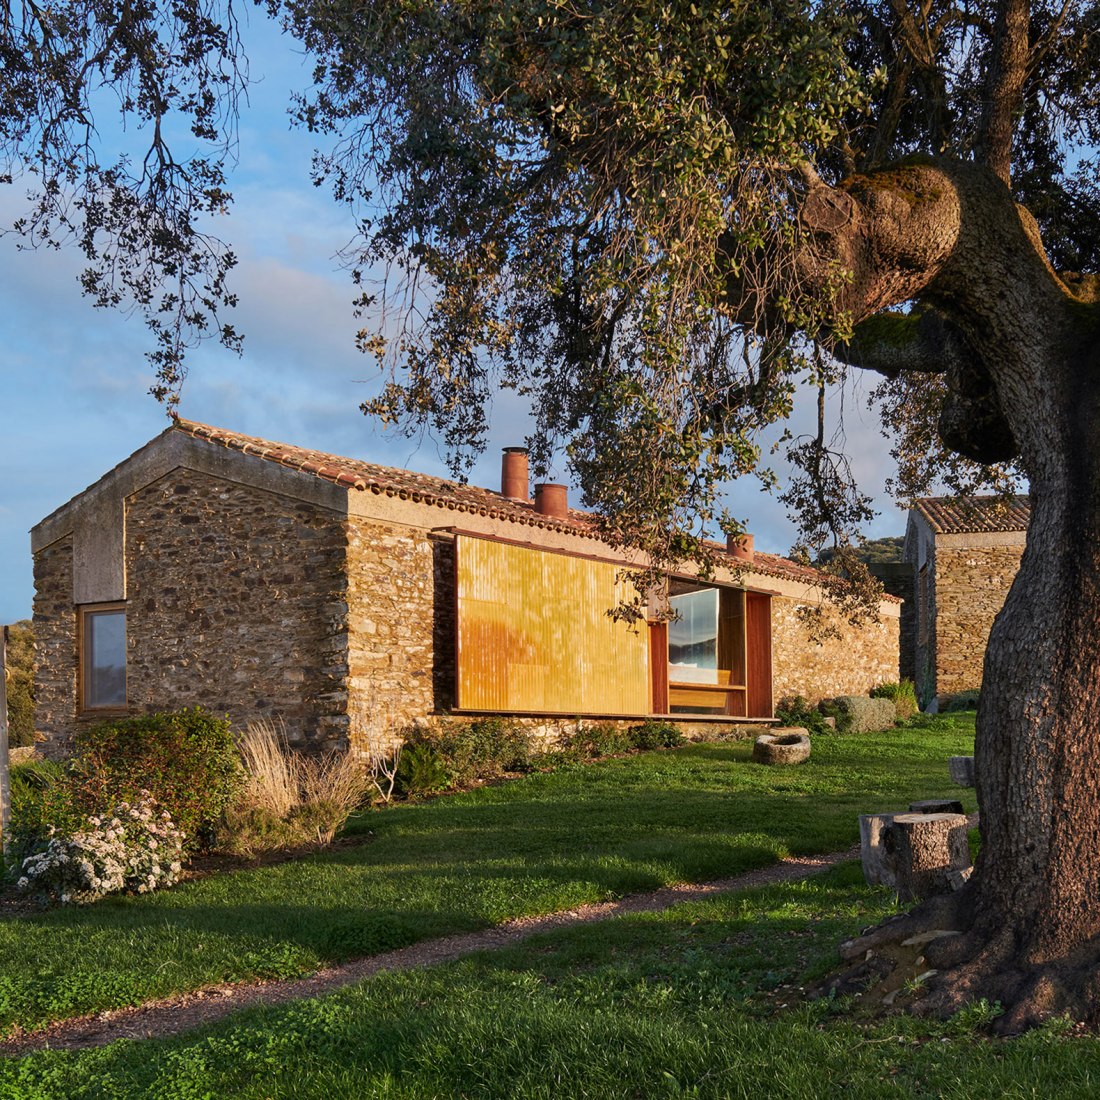 Cortijo Jamonero House by Jorge Vidal and Marcos Catalán. Photograph by Eugeni Pons.